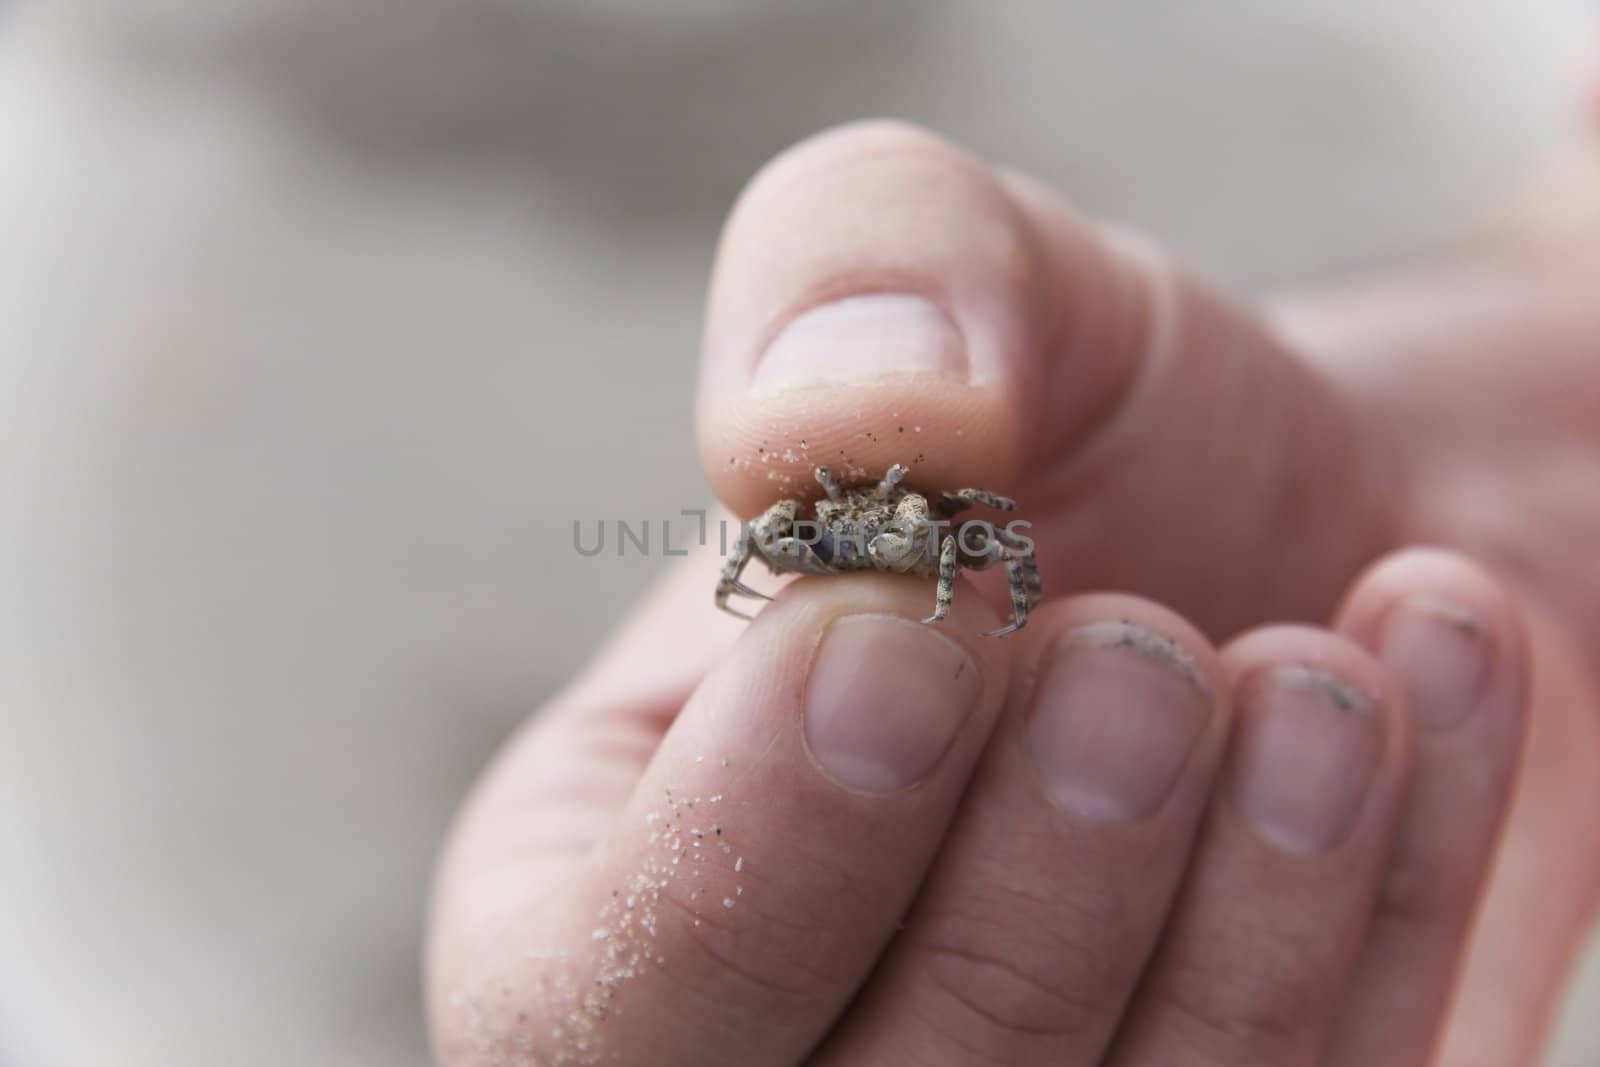 Tini crab held in a hand